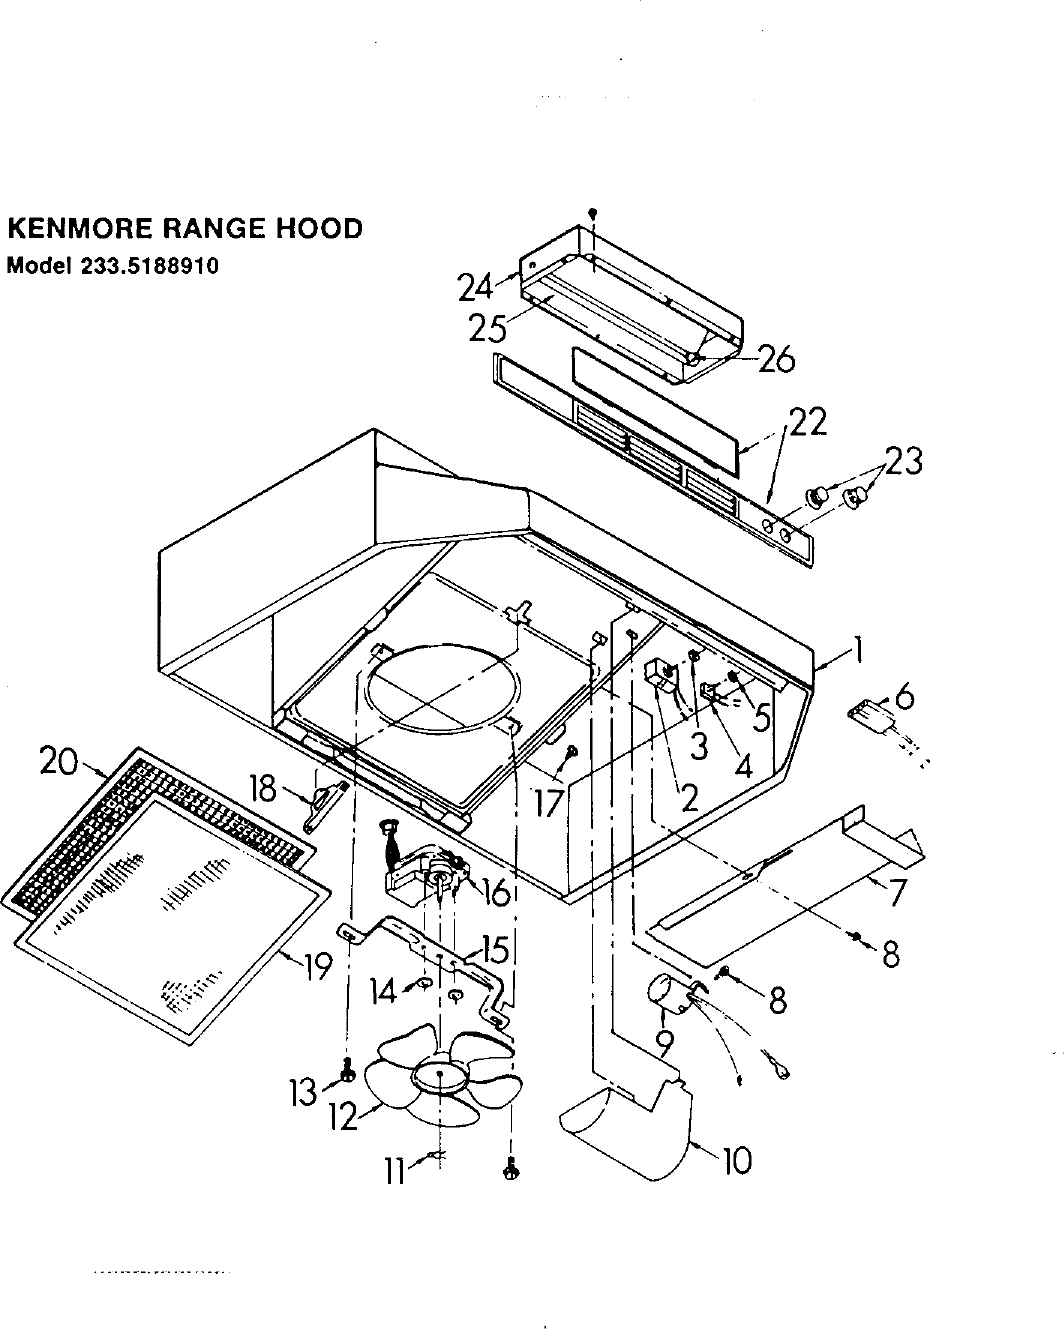 Page 2 of 4 - Kenmore 23351898 User Manual  RANGE HOOD - Manuals And Guides L0050008